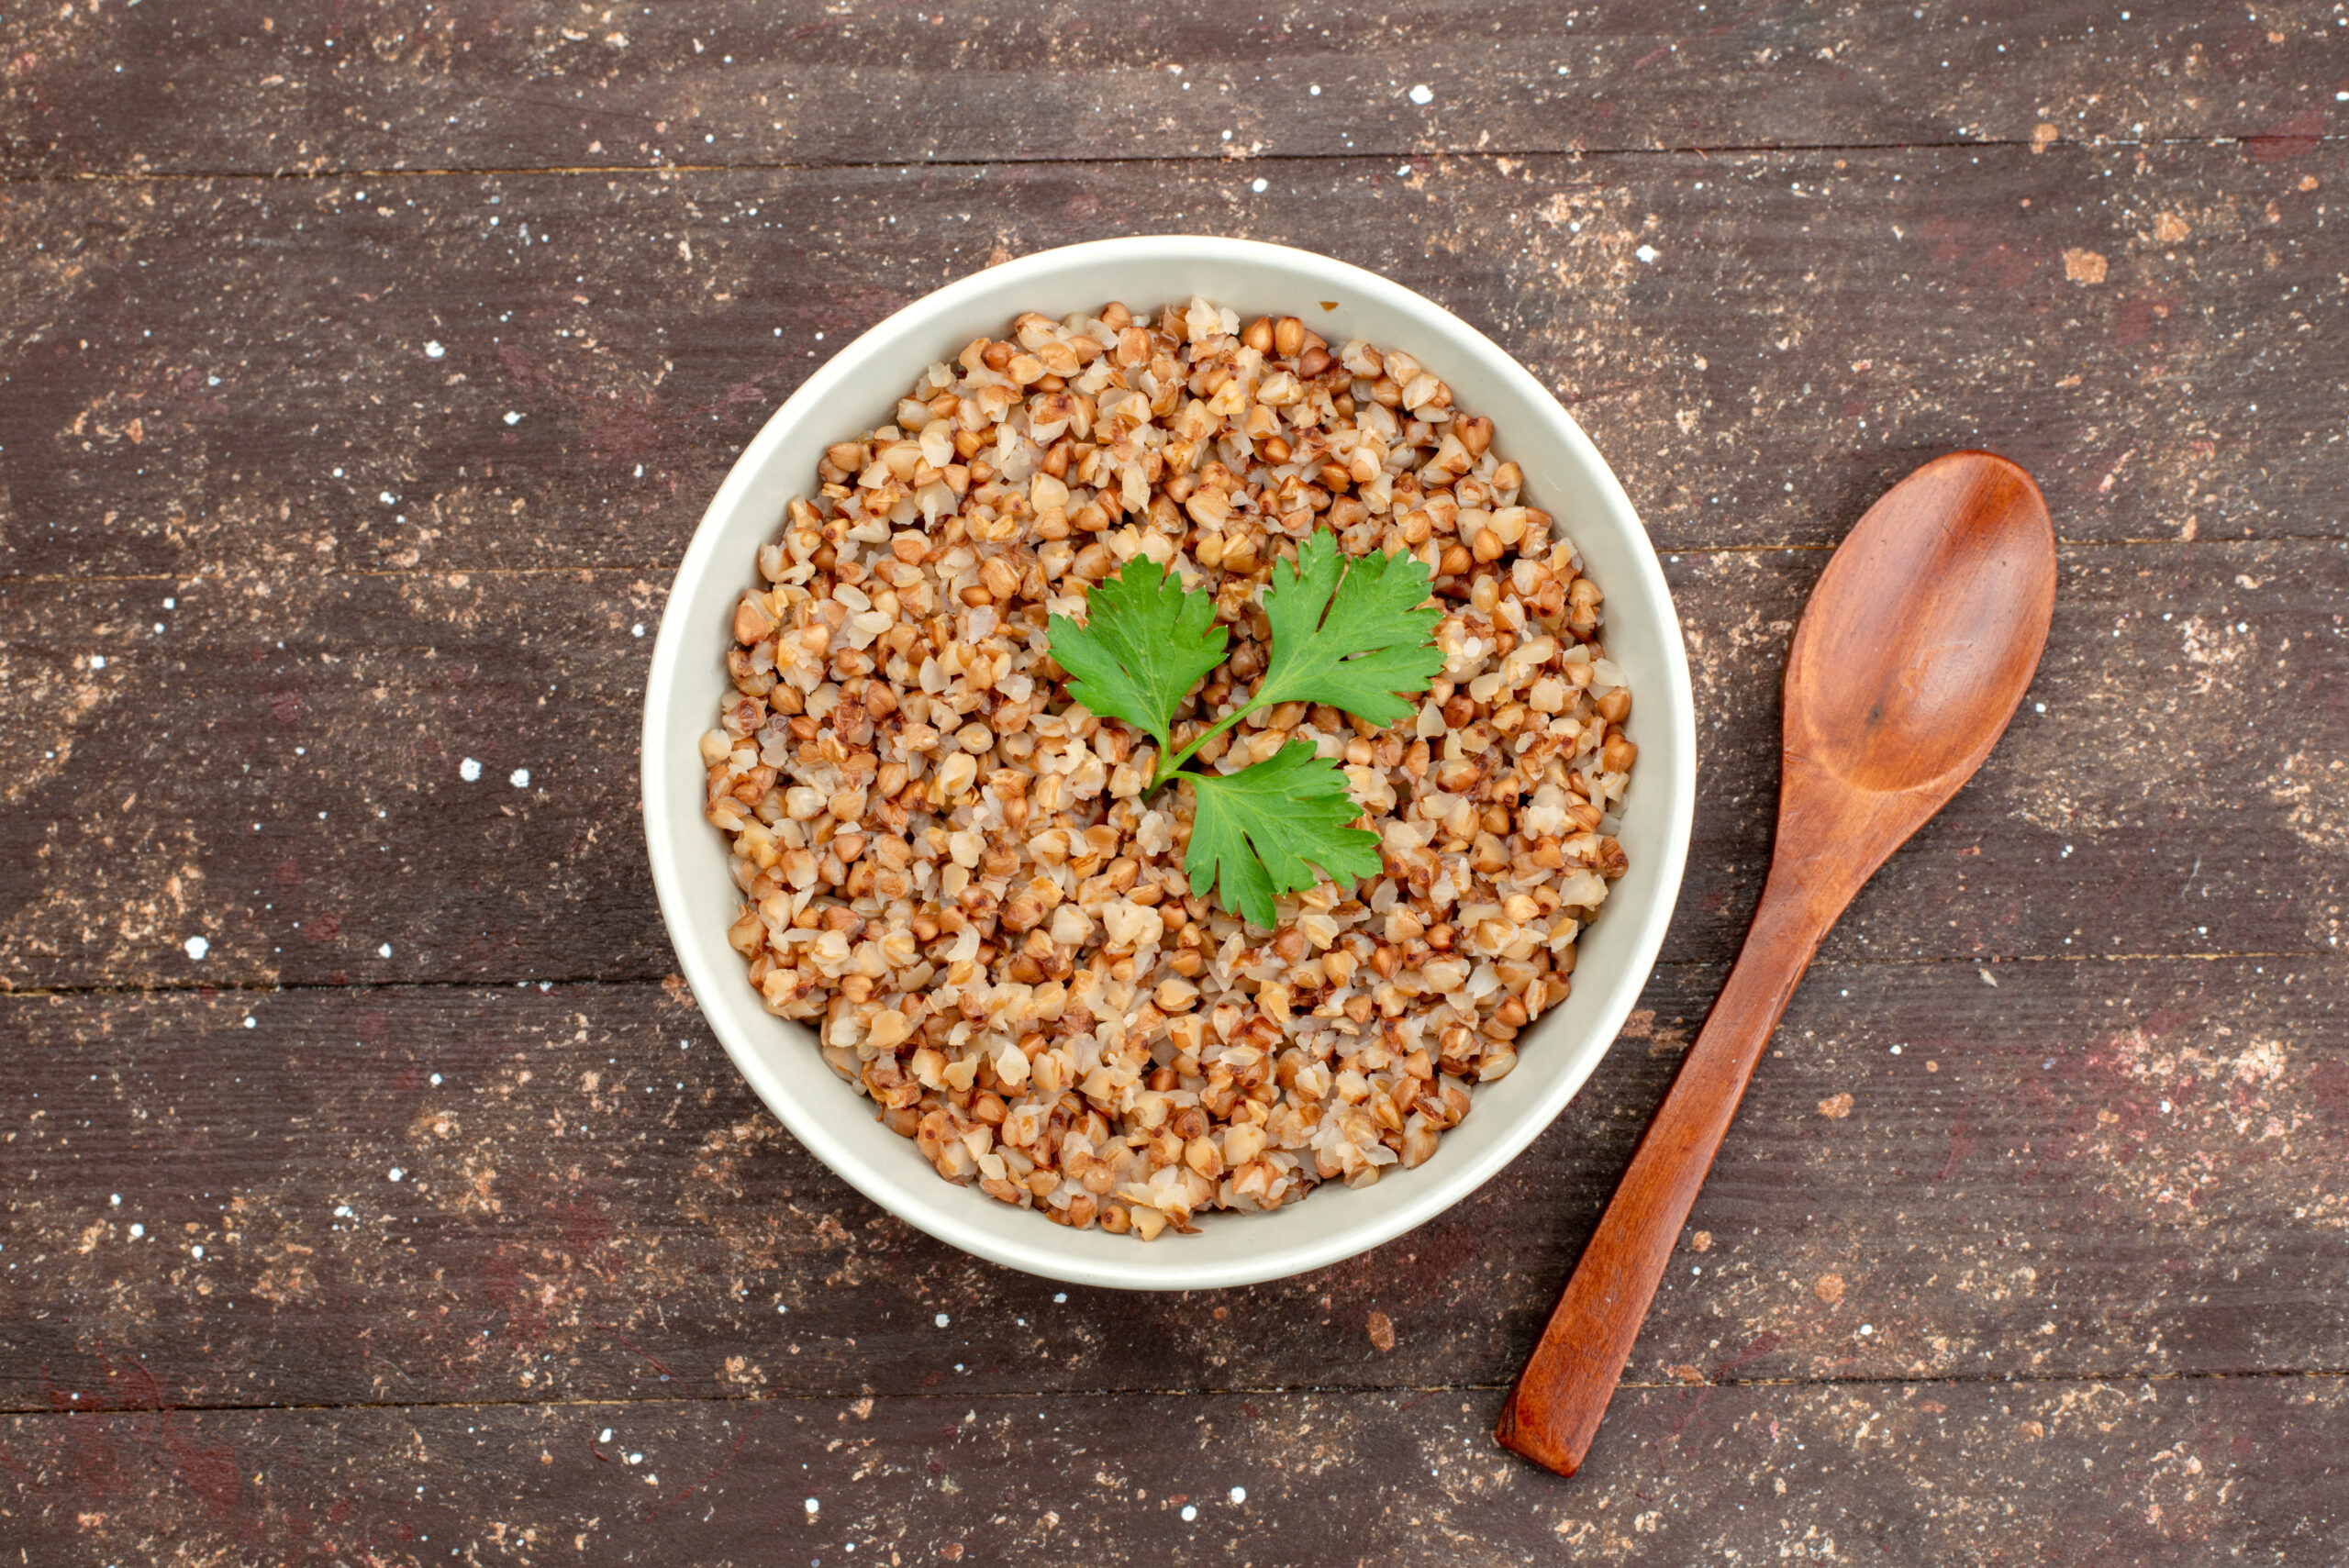 Quinoa the mother of all grain: A Nutritious Superfood Introduced by Shadleen’s Herb